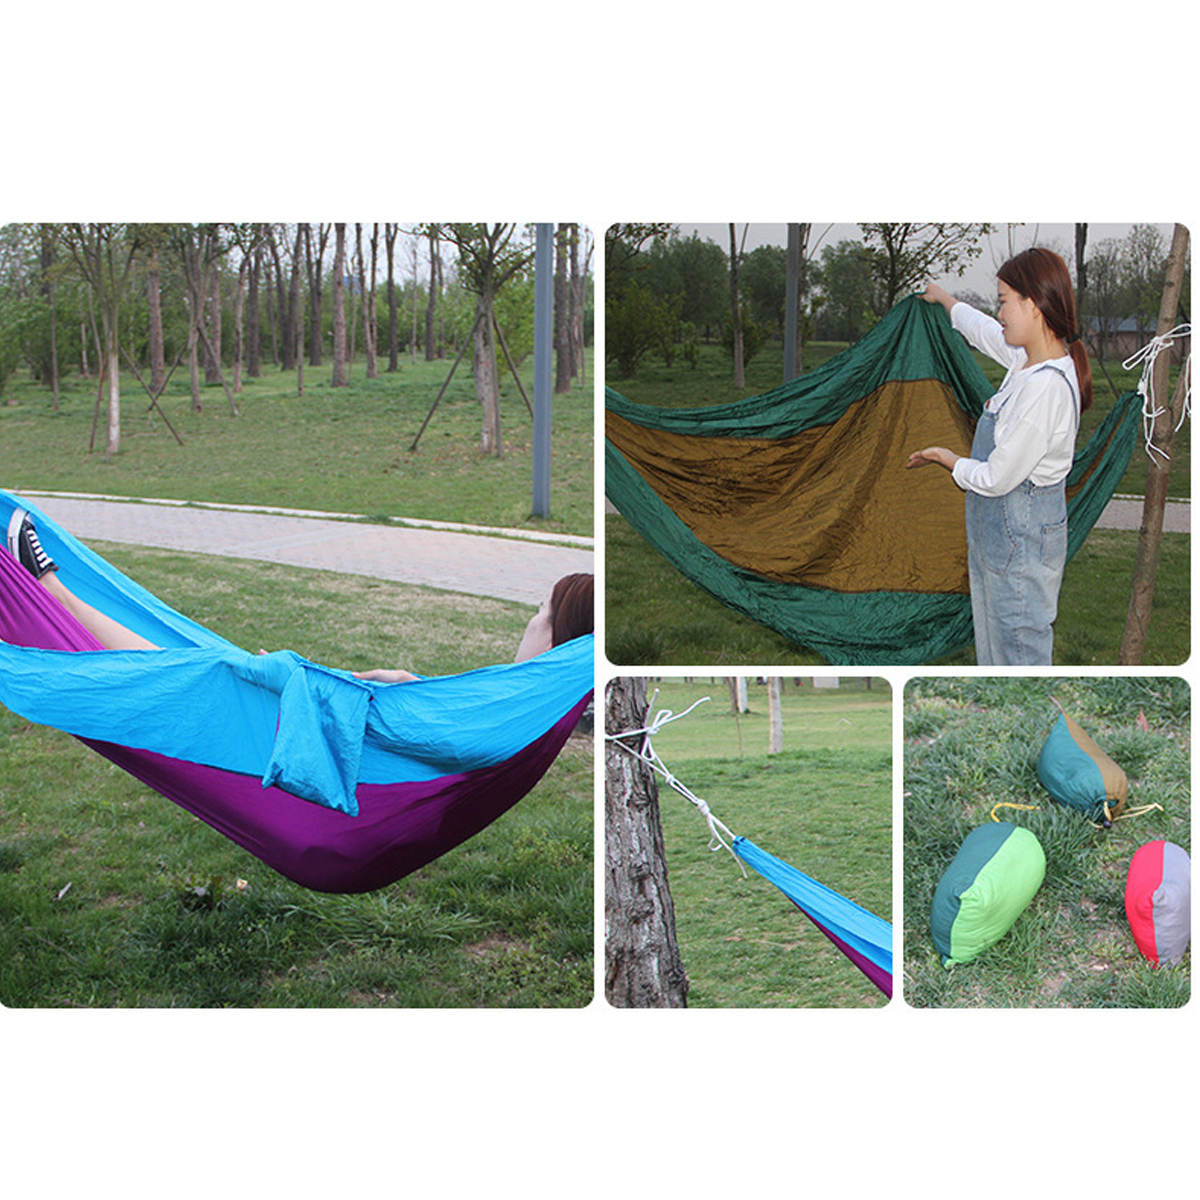 IPReereg-Double-Person-Hammock-Nylon-Swing-Hanging-Bed-Outdoor-Camping-Travel-Max-Load-300kg-1742182-7